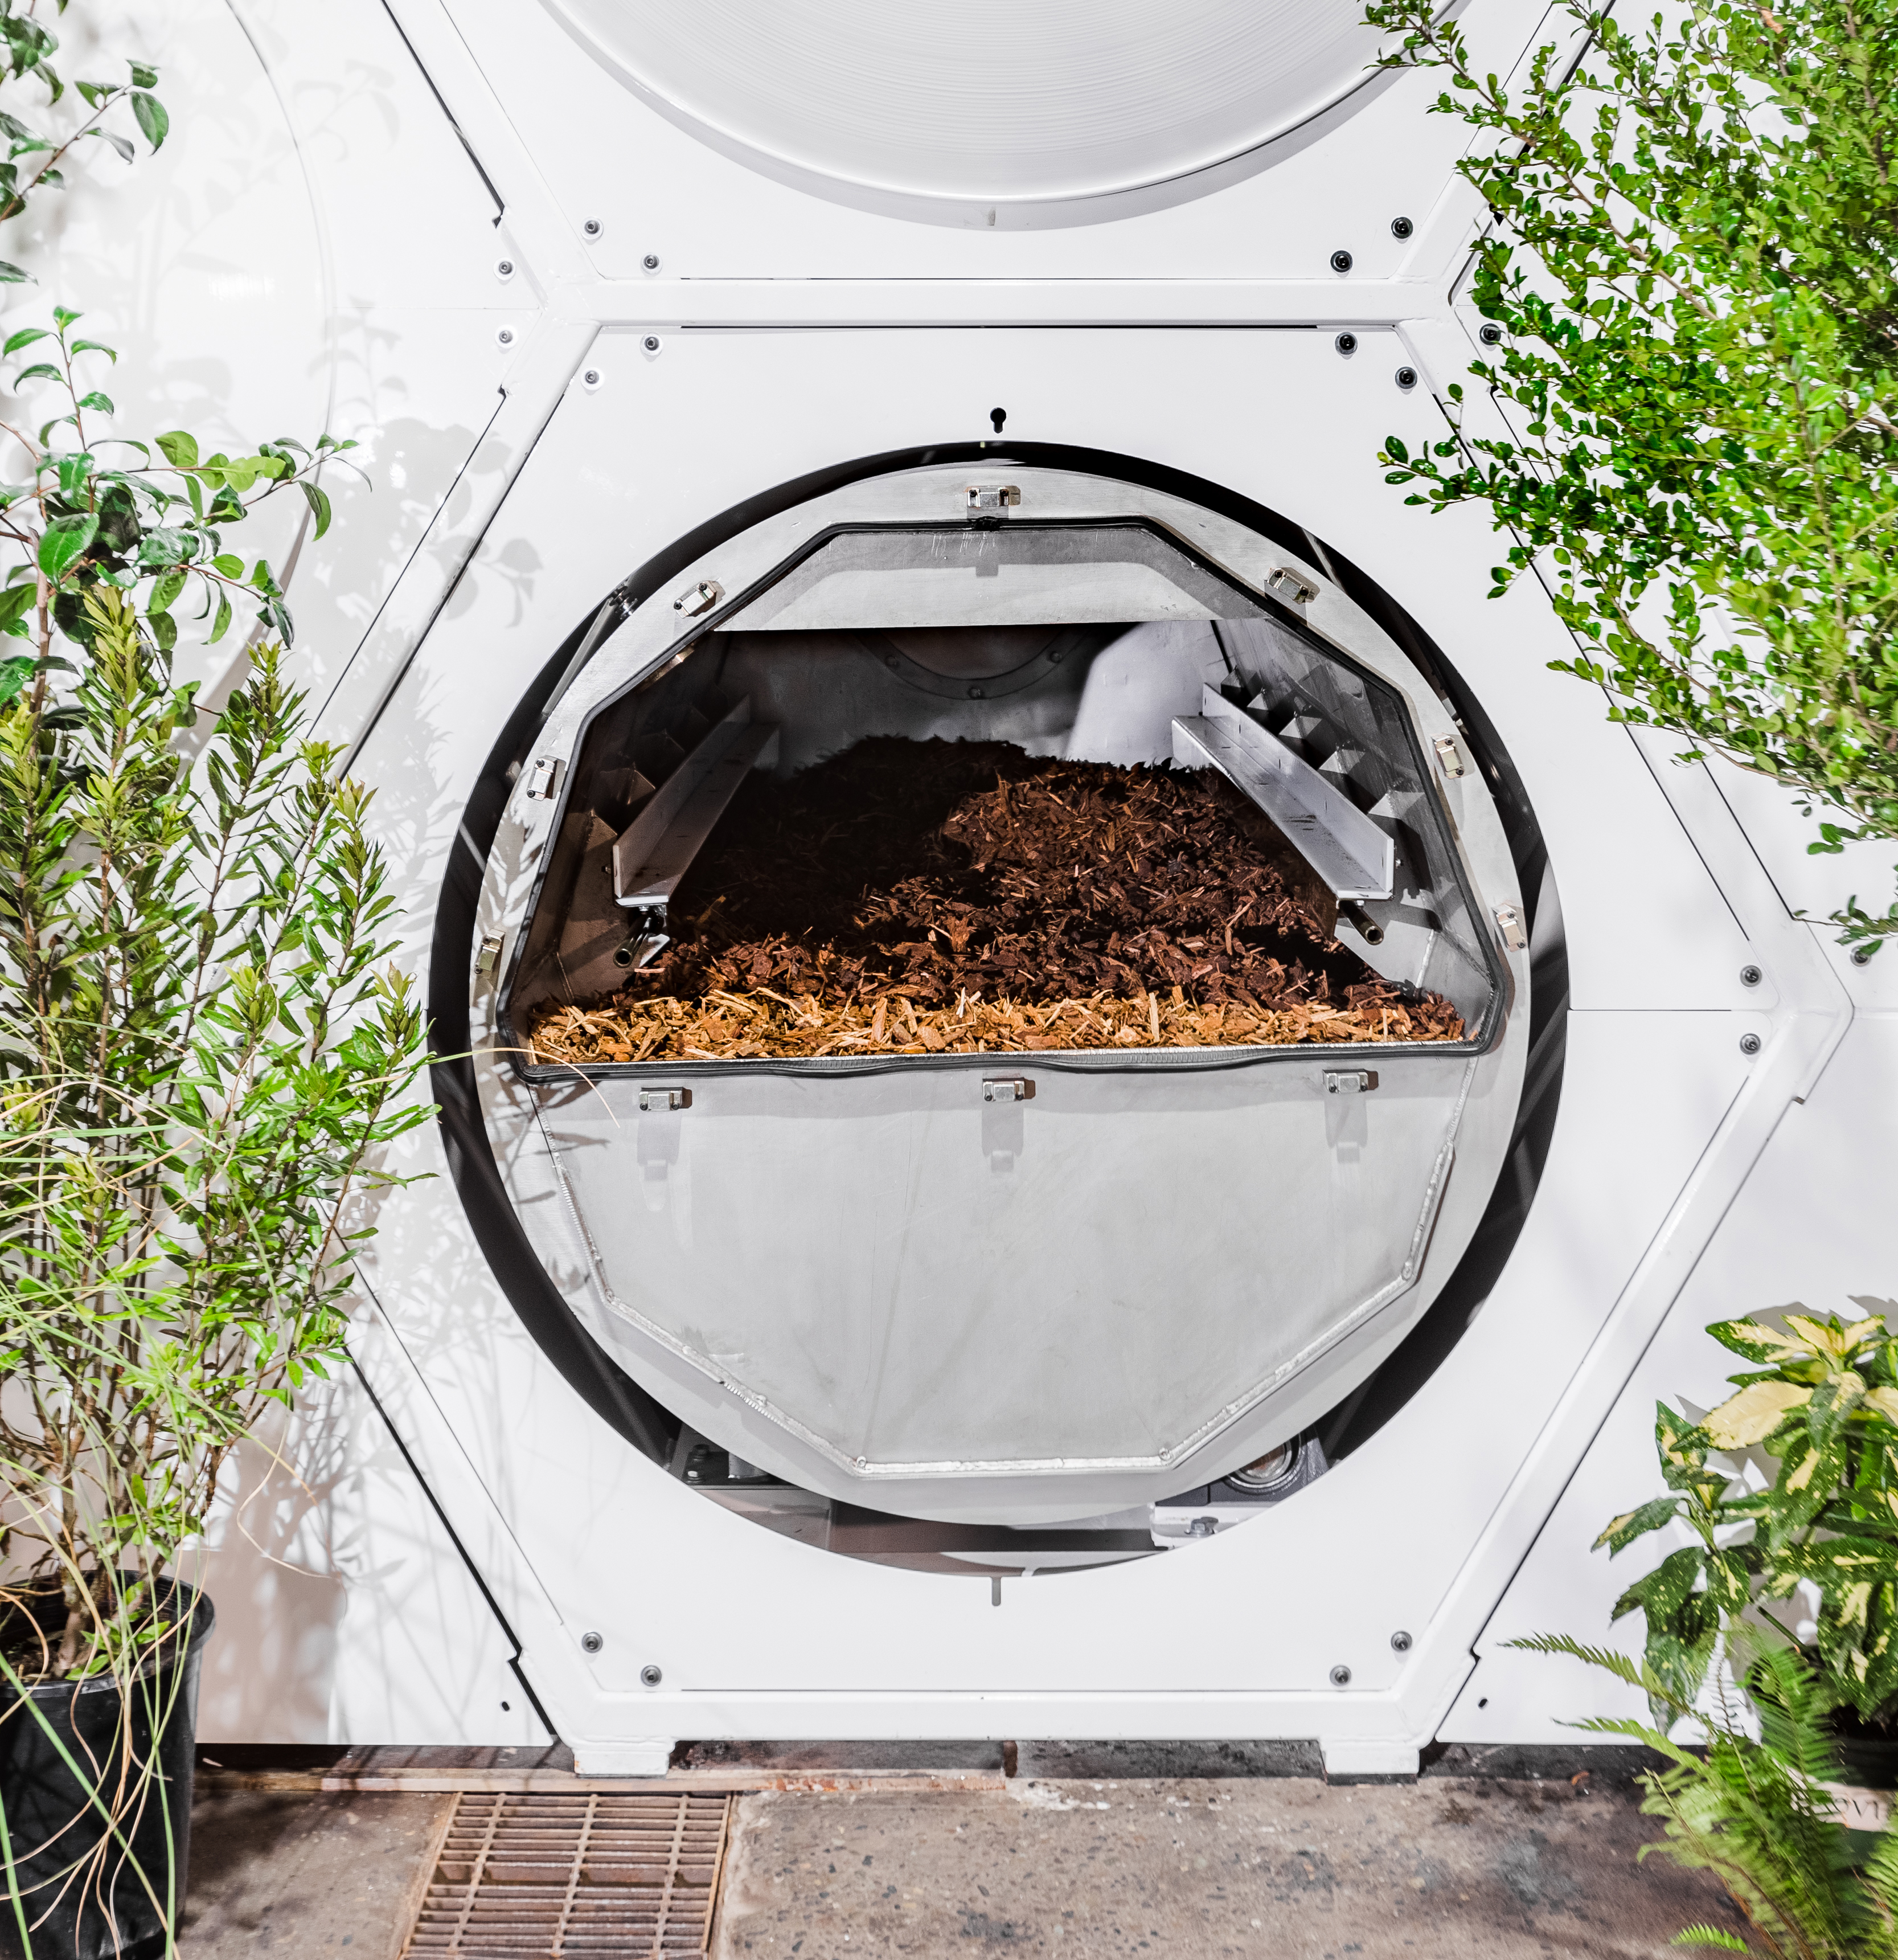 A photo shows a close up of a Recompose composting vessel filled with mulch and surrounded by green potted plants.